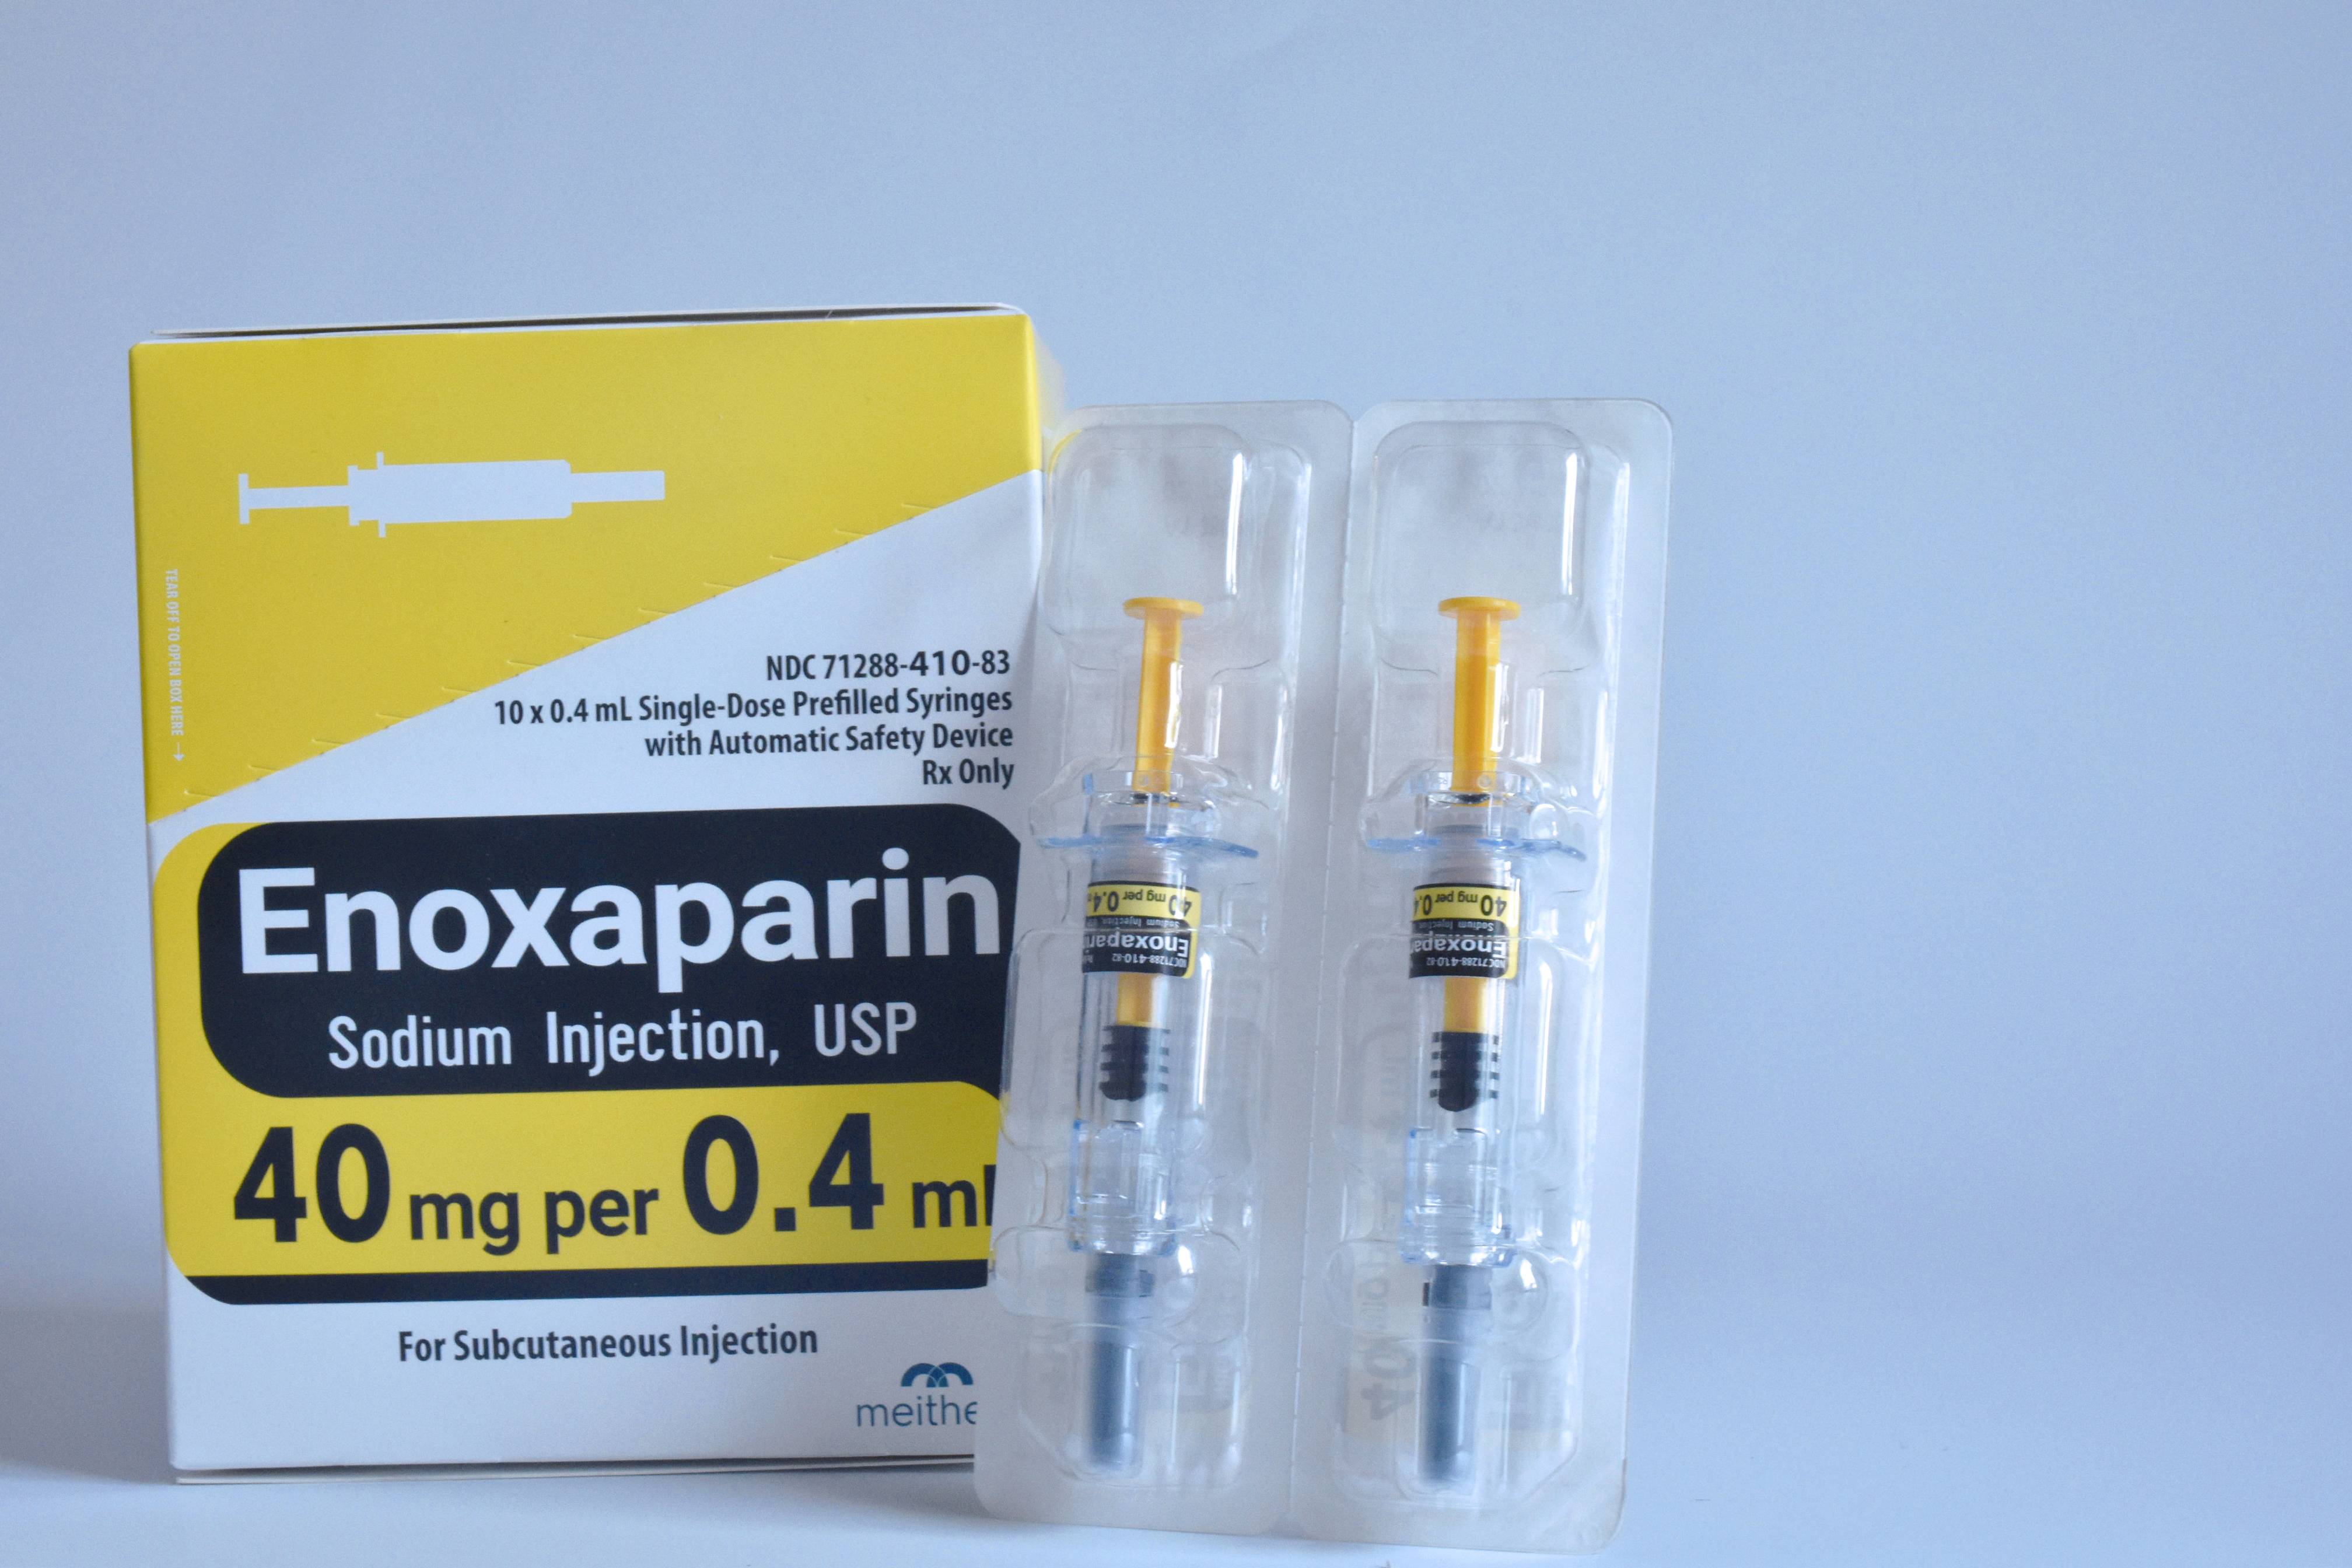 Enoxaparin Sodium Injection of NKF approved in Egypt